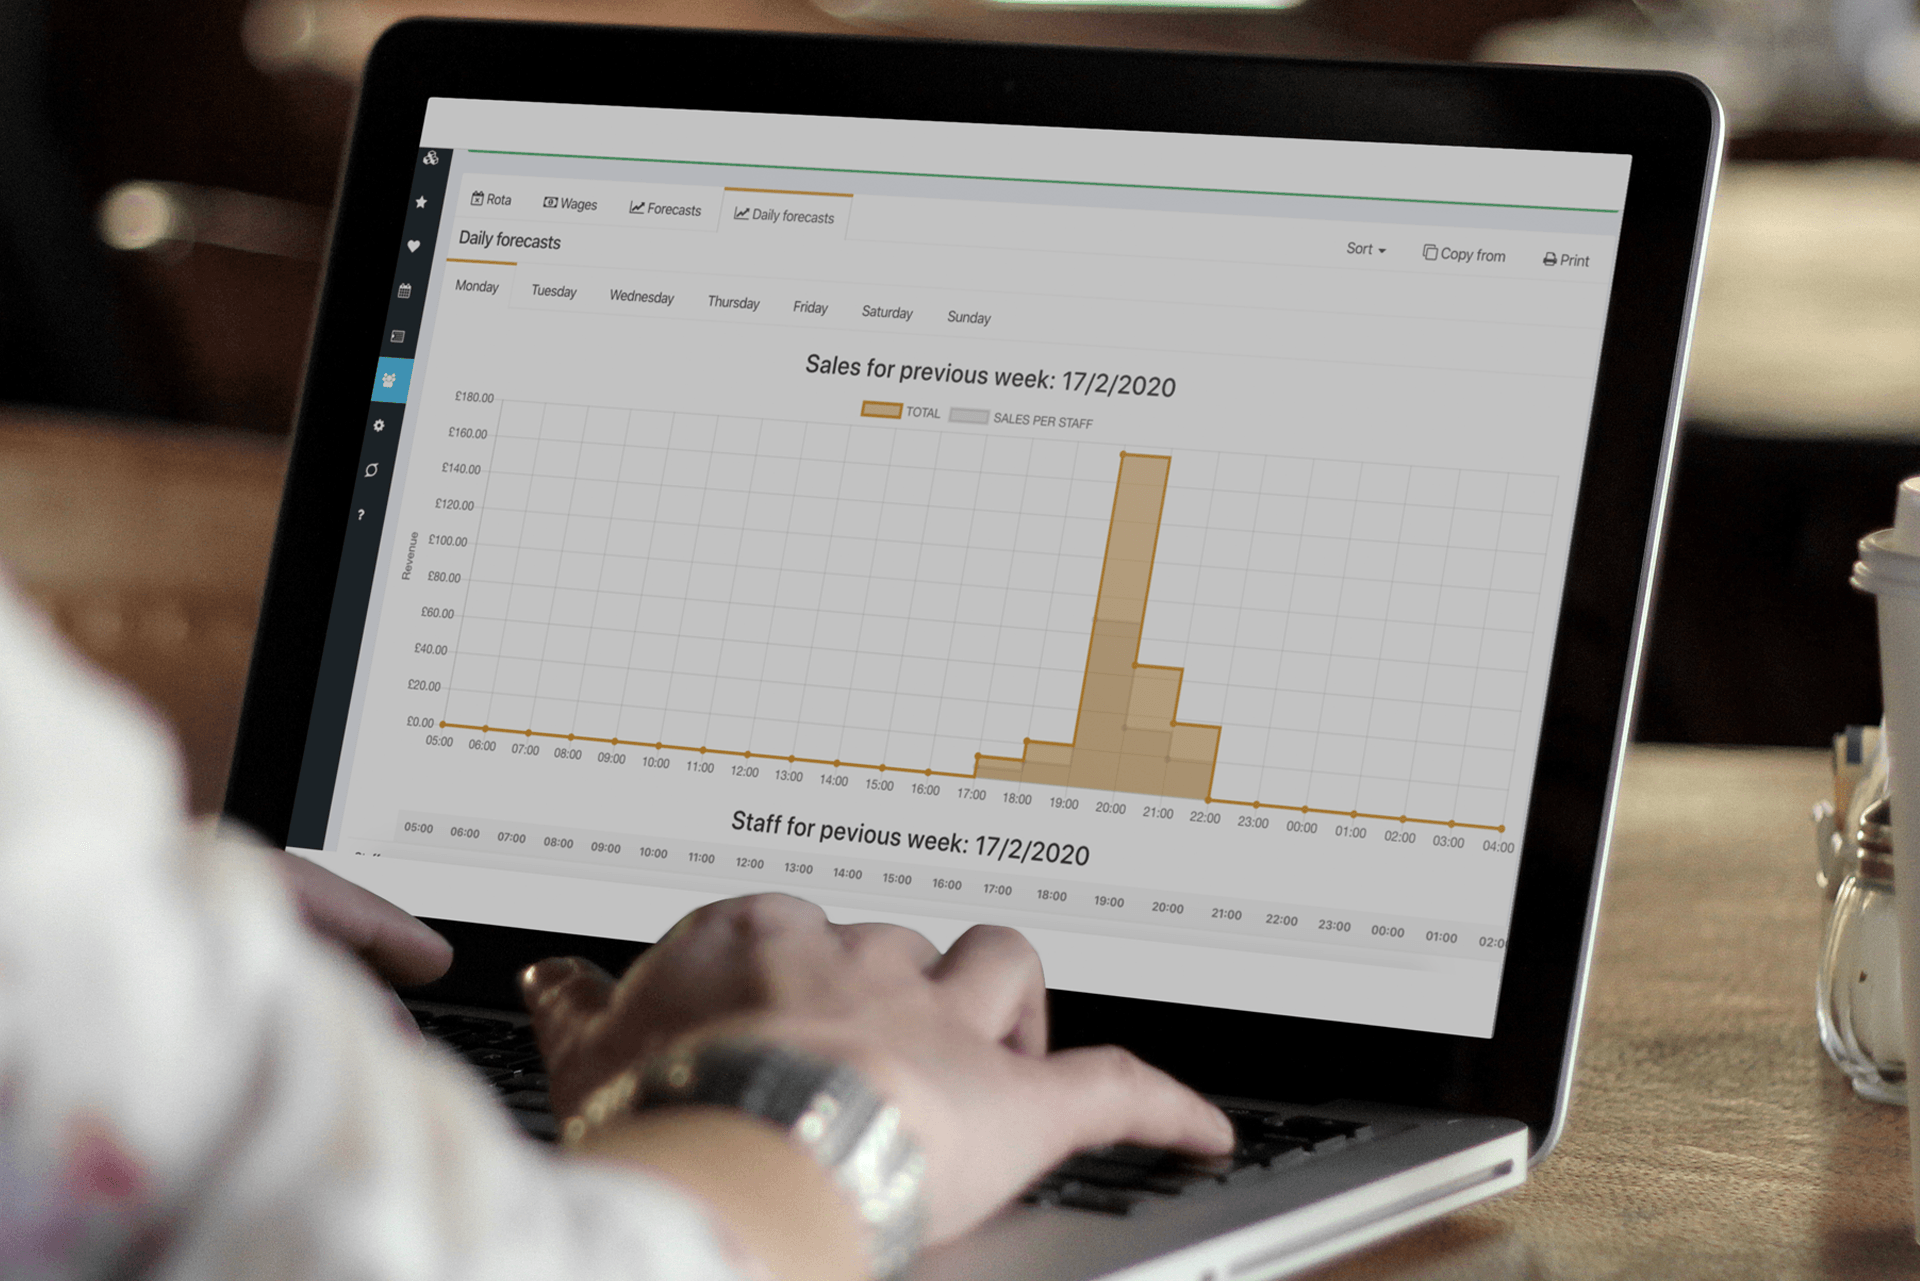 Staff scheduling tool, sales forecasts